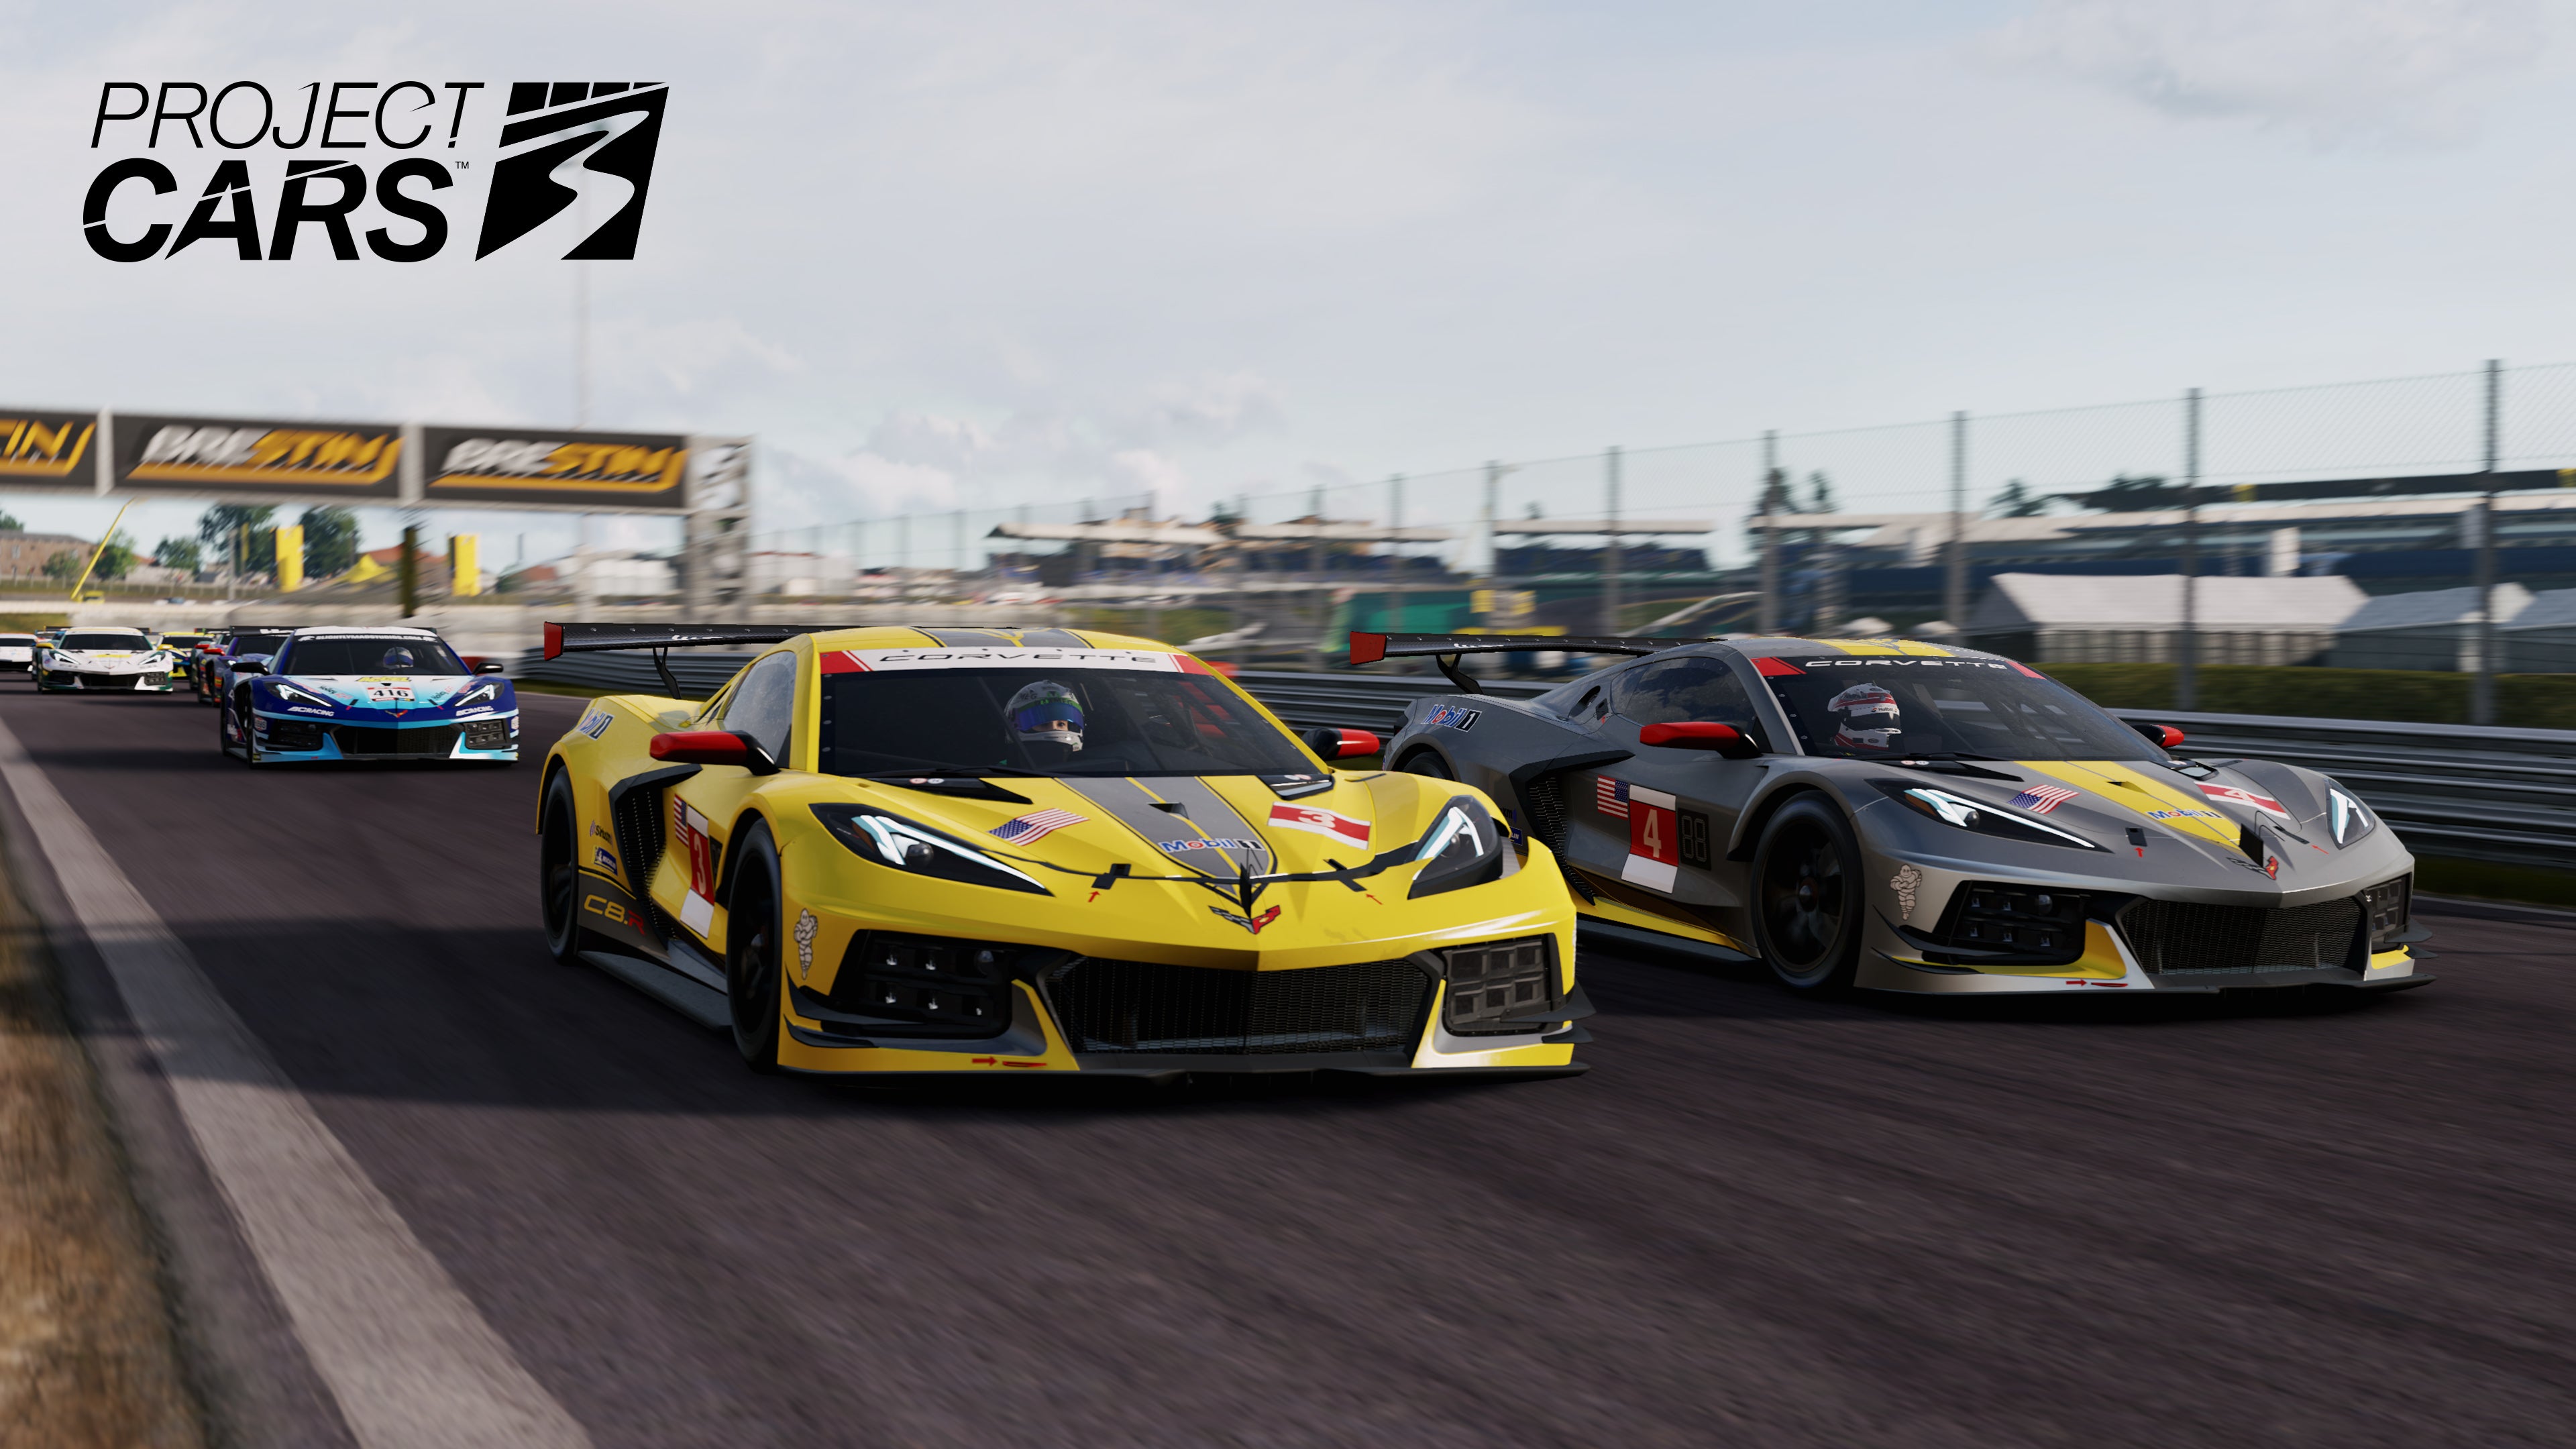 The brand-new Corvette C8.R is coming to Project CARS 3.